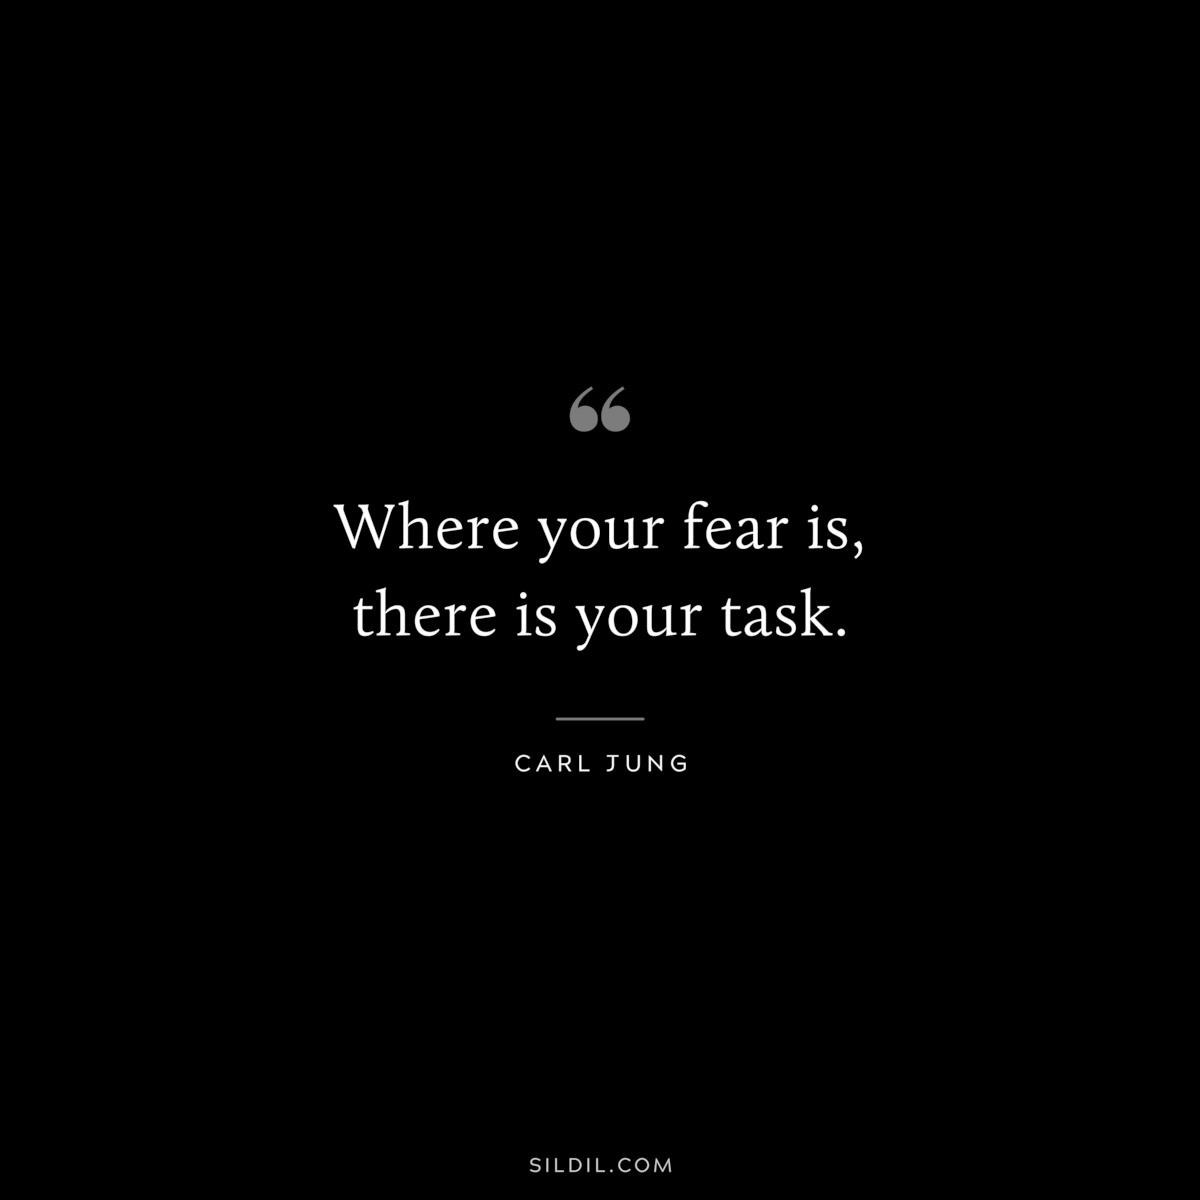 Where your fear is, there is your task. ― Carl Jung